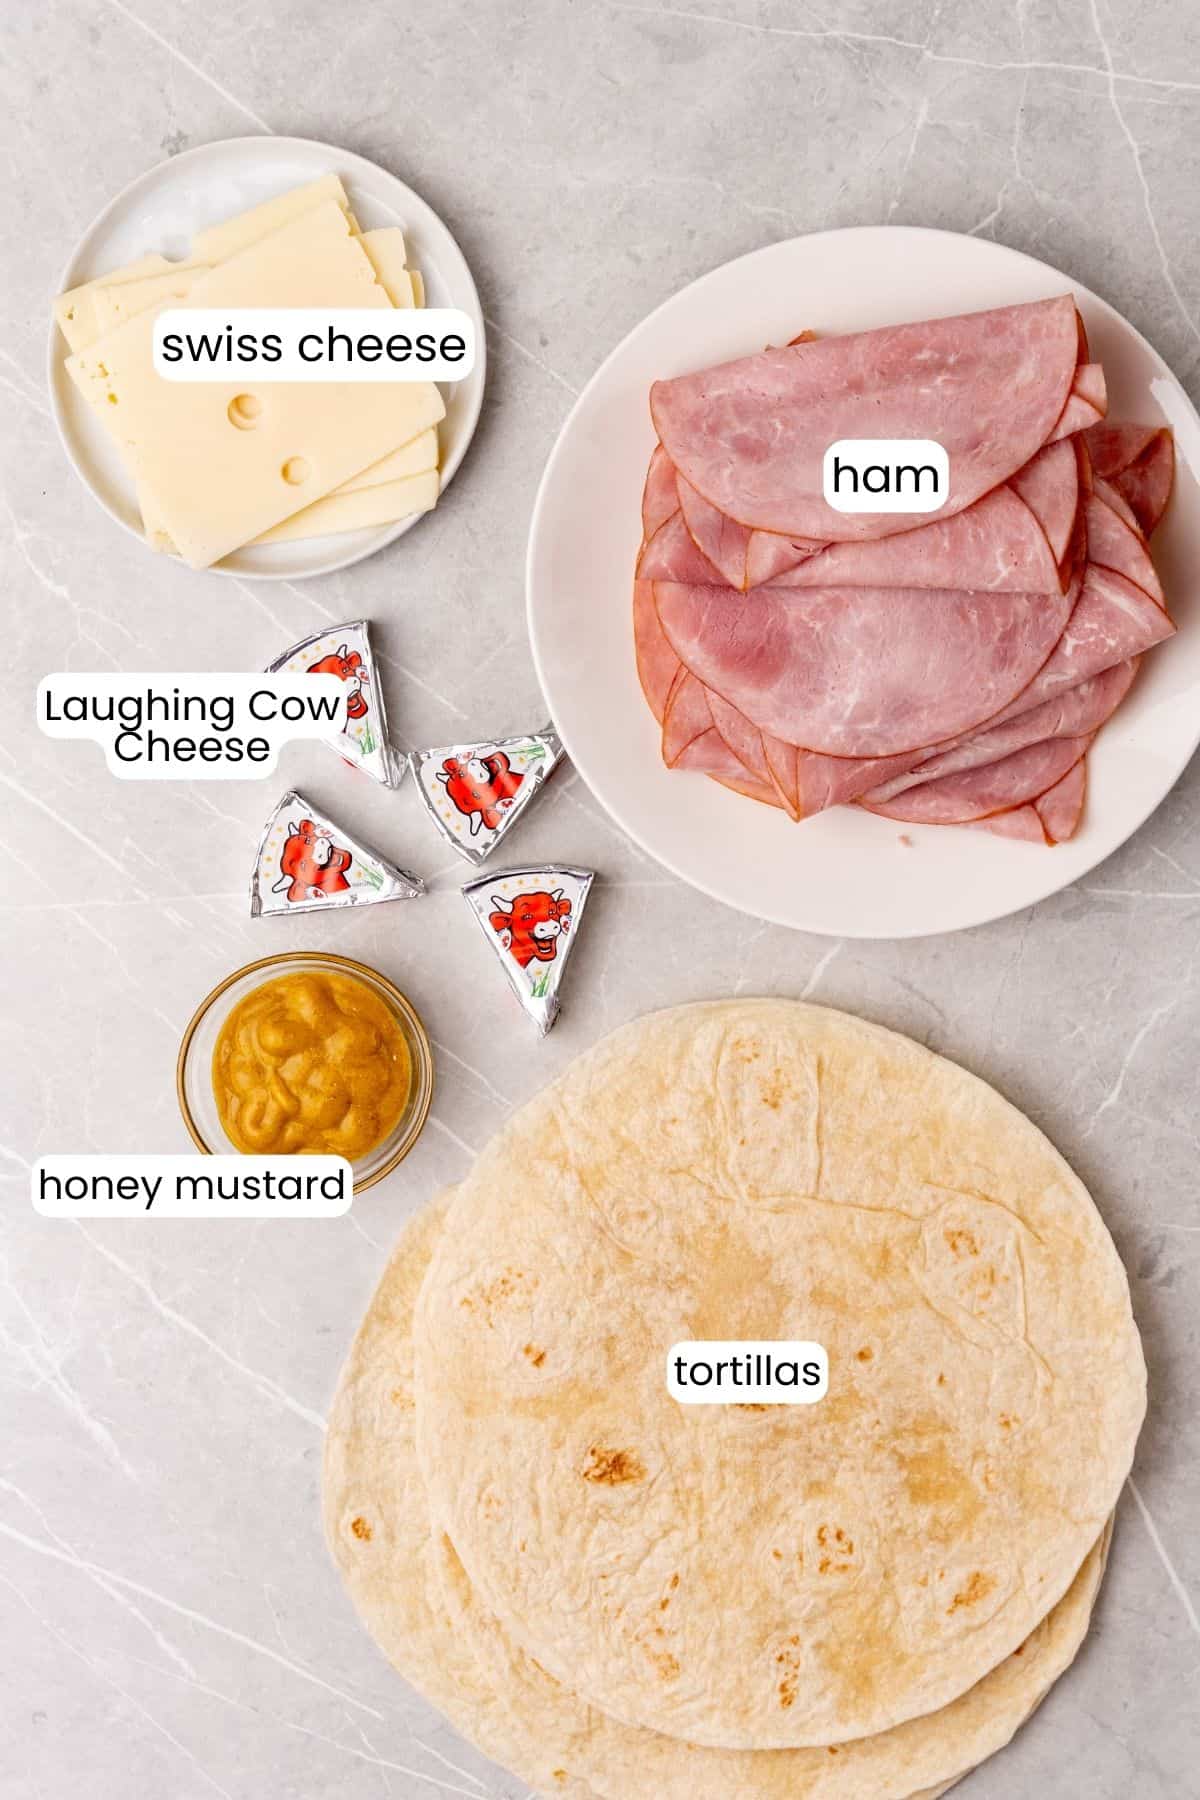         Ingredients for ham and cheese wraps.